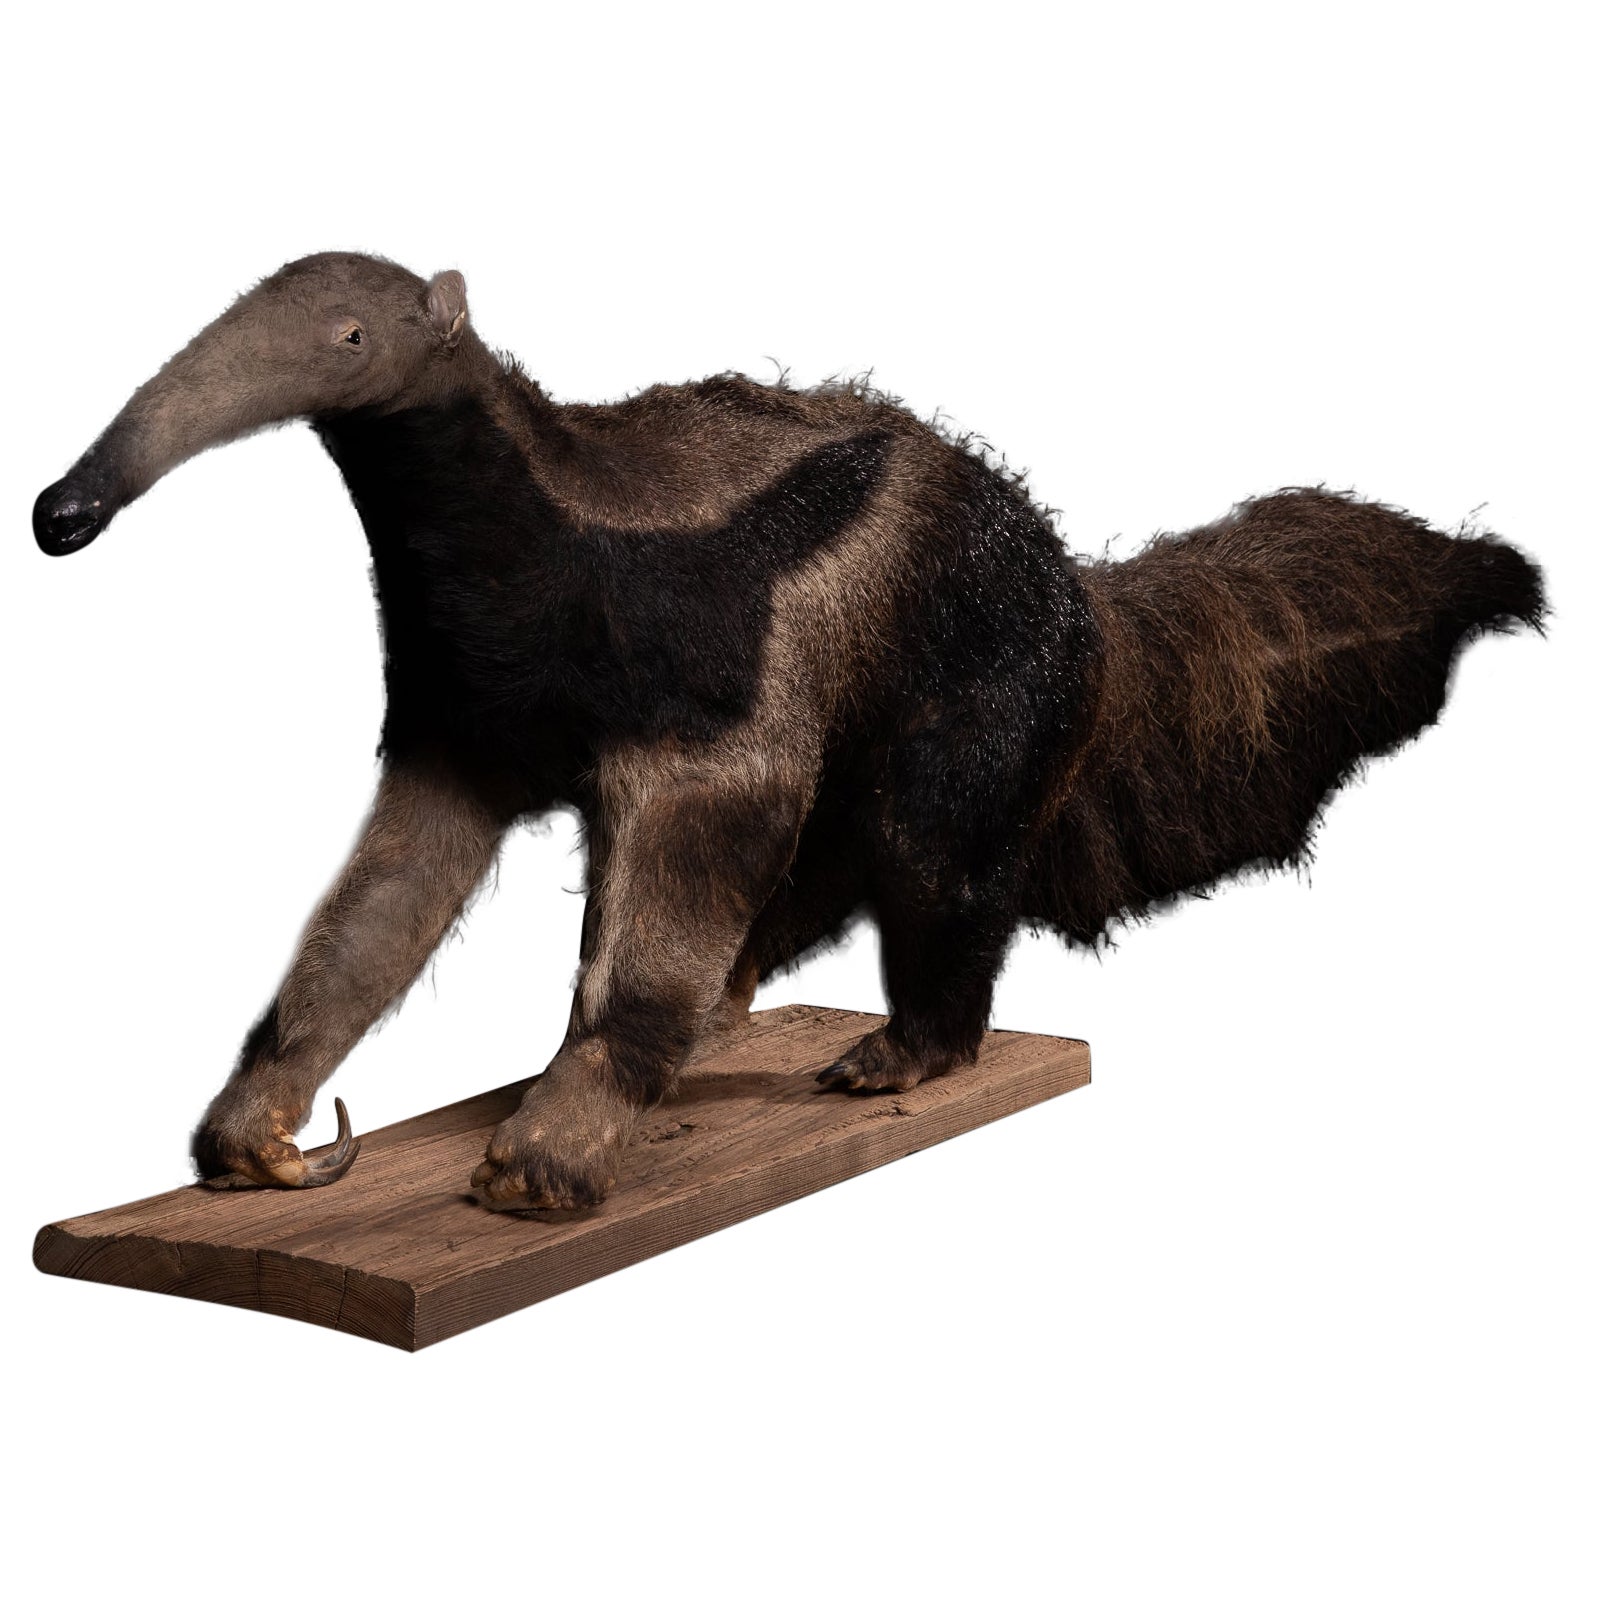 Giant Anteater Mounted by Mr.Monin Taxidermiste at the Zoo Des Bruniaux, France For Sale